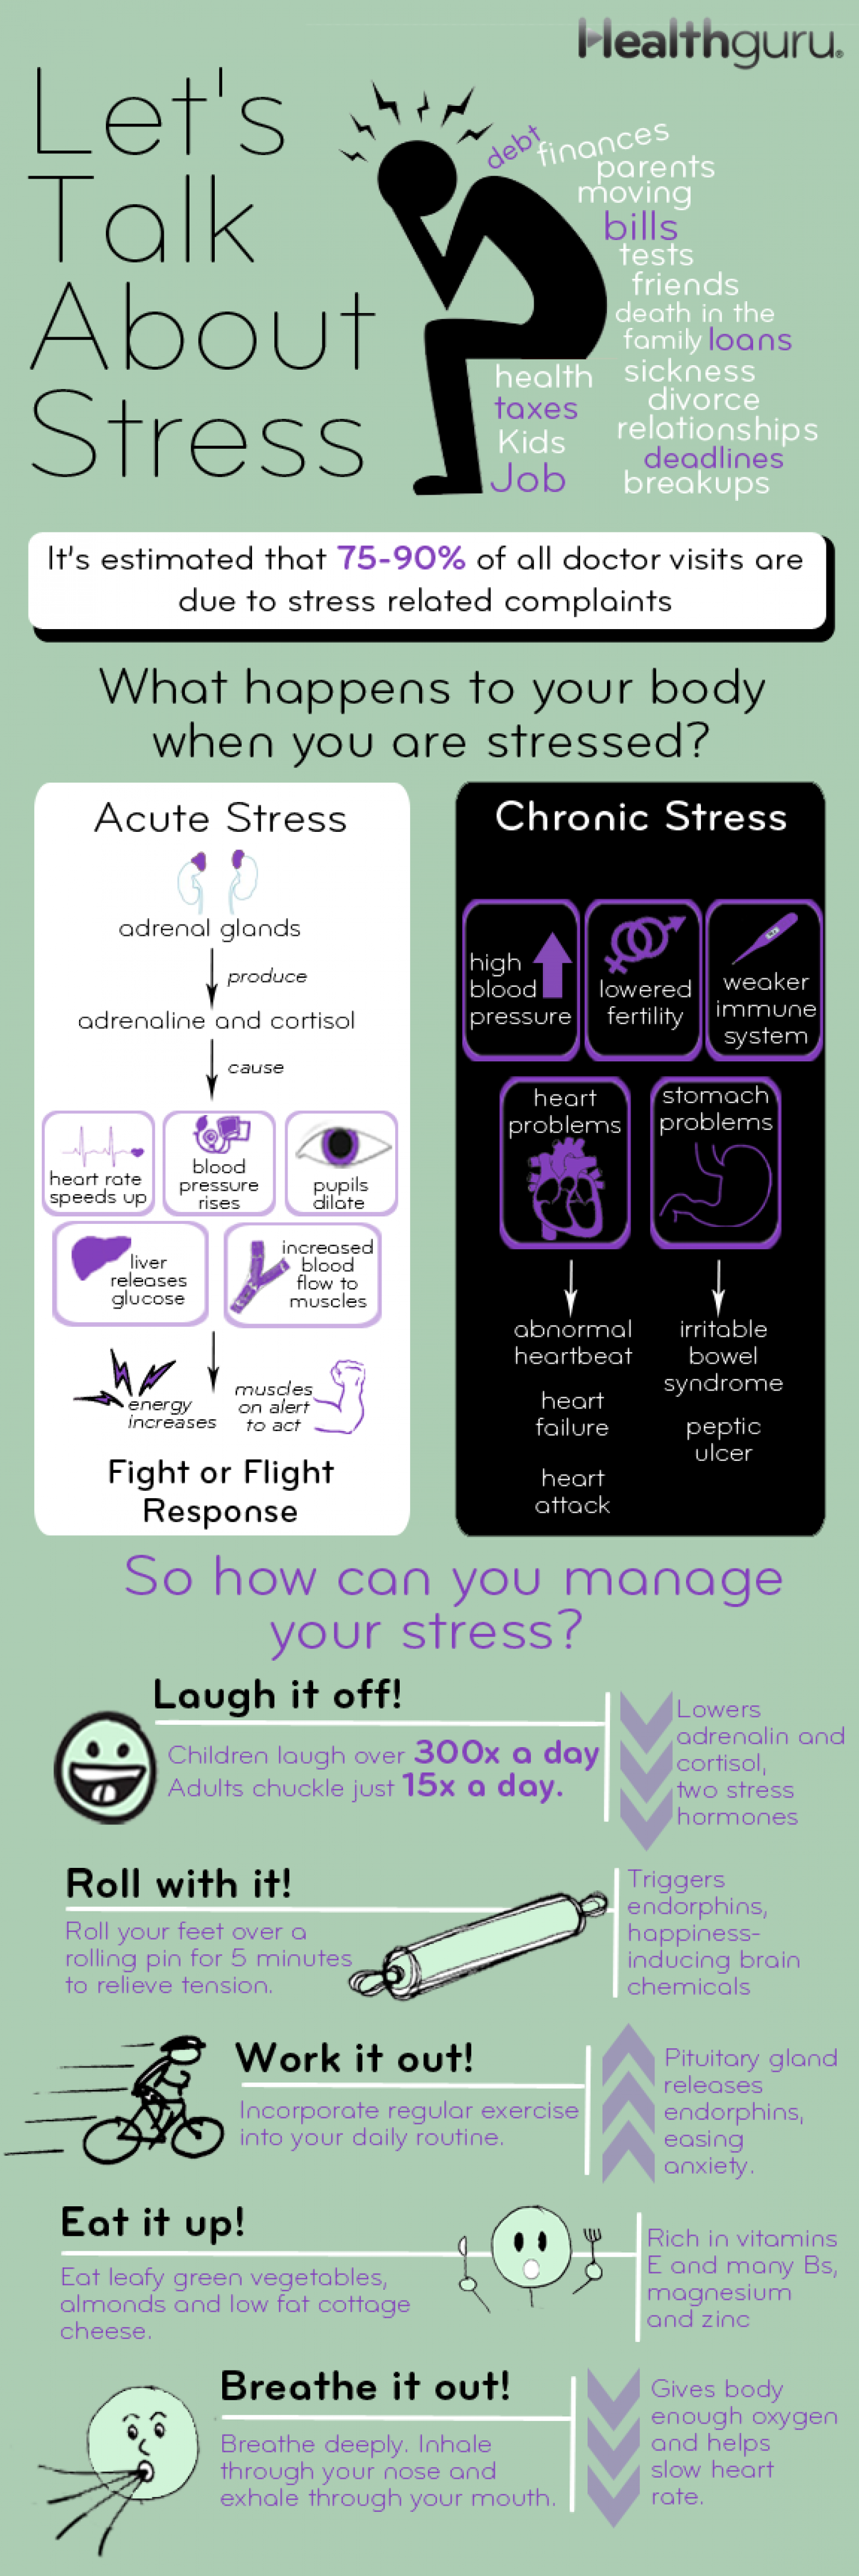 Let's Talk About Stress Infographic